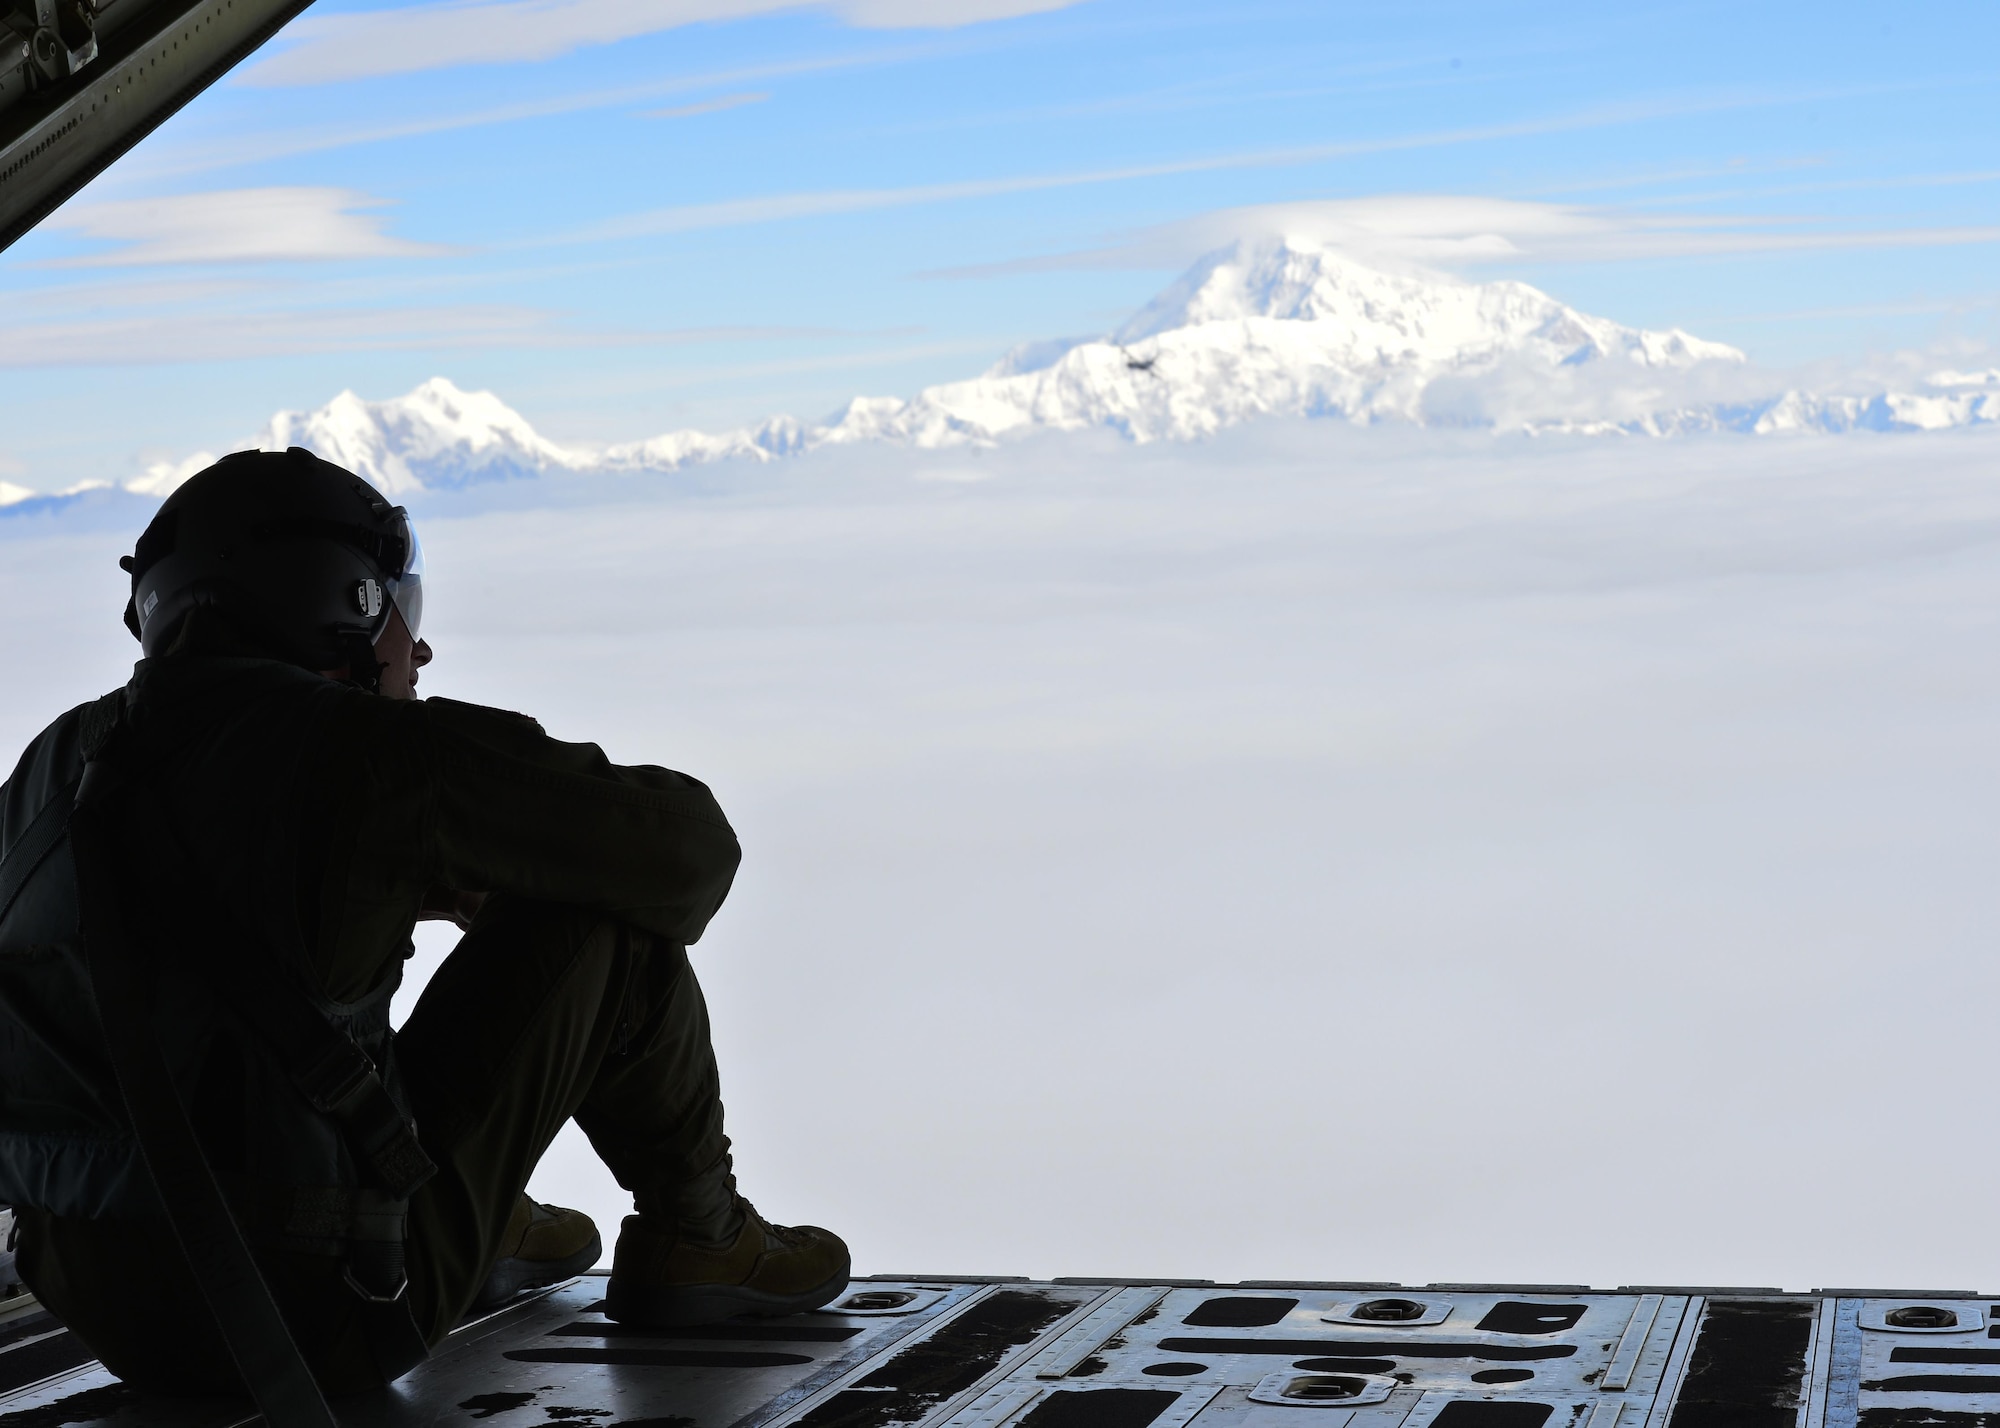 U.S. Air Force Senior Airman Jordon Speedy, 41st Airlift Squadron loadmaster, overlooks the Alaskan landscape July 19, 2016. The 41st AS is conducting training in Alaska to prepare for the terrain present in austere locations. Alaska provides an uncontended airspace which allows aircrews to train more effectively without having to adjust to commercial flight patterns. (U.S. Air Force photo by Senior Airman Kaylee Clark)